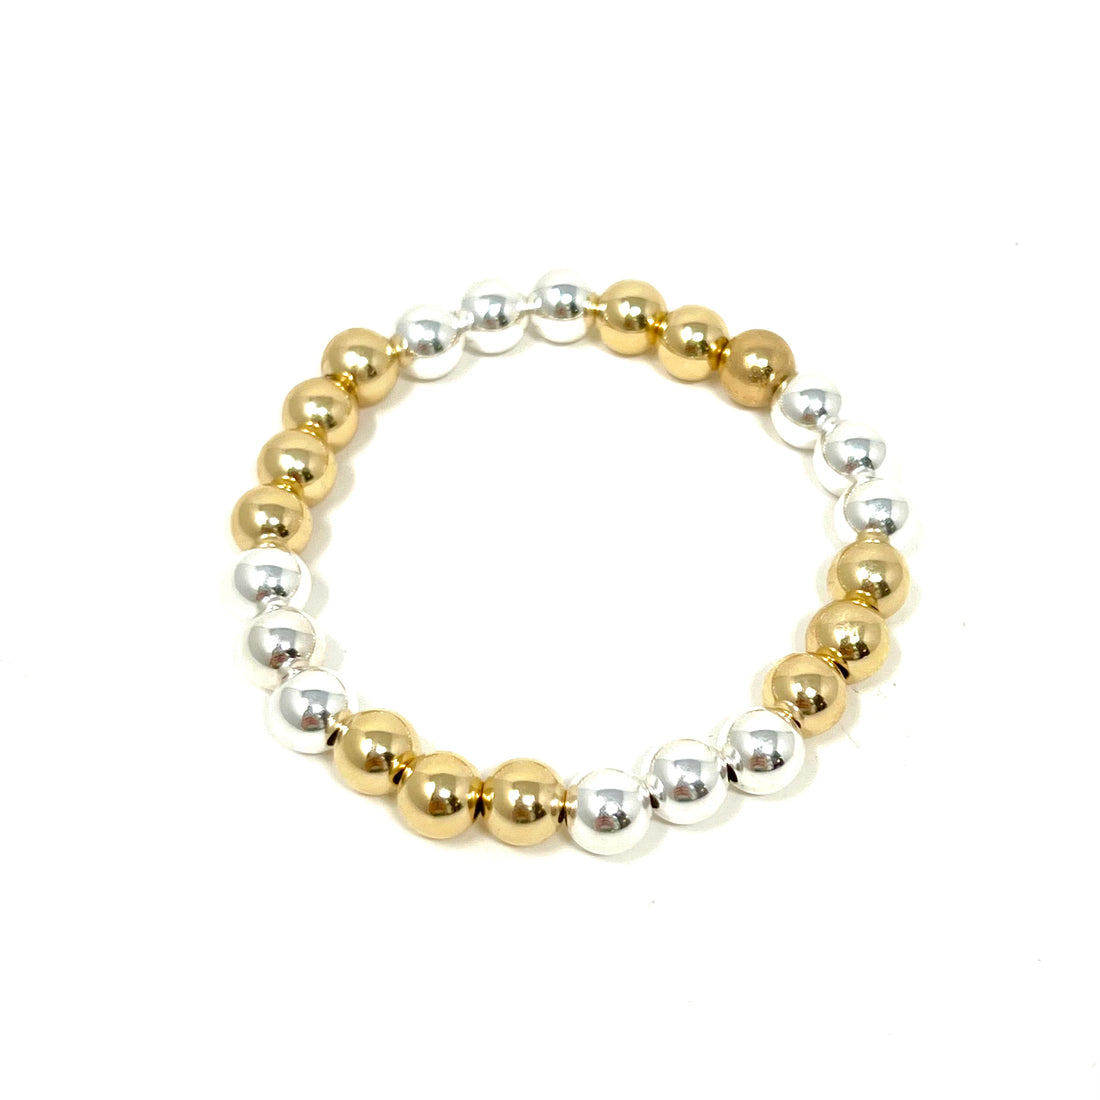 Large Ball Bracelet in Blocks of Silver and Gold